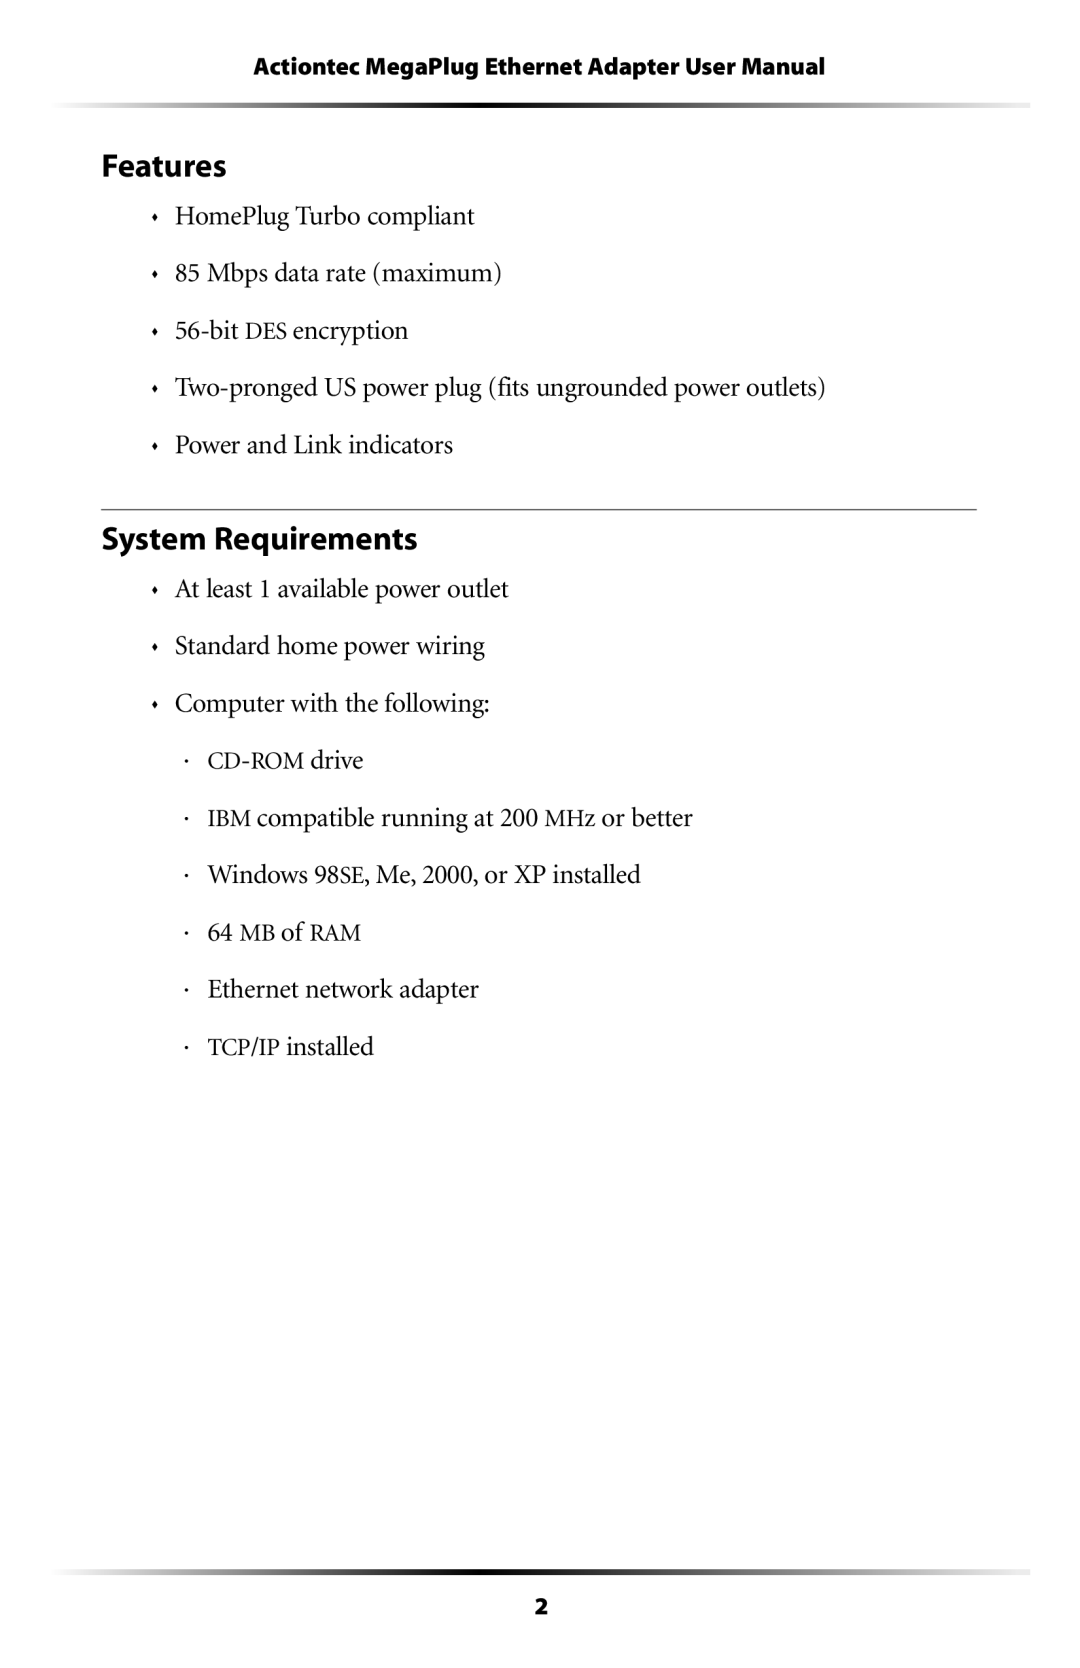 Actiontec electronic HPE100T user manual Features, System Requirements 